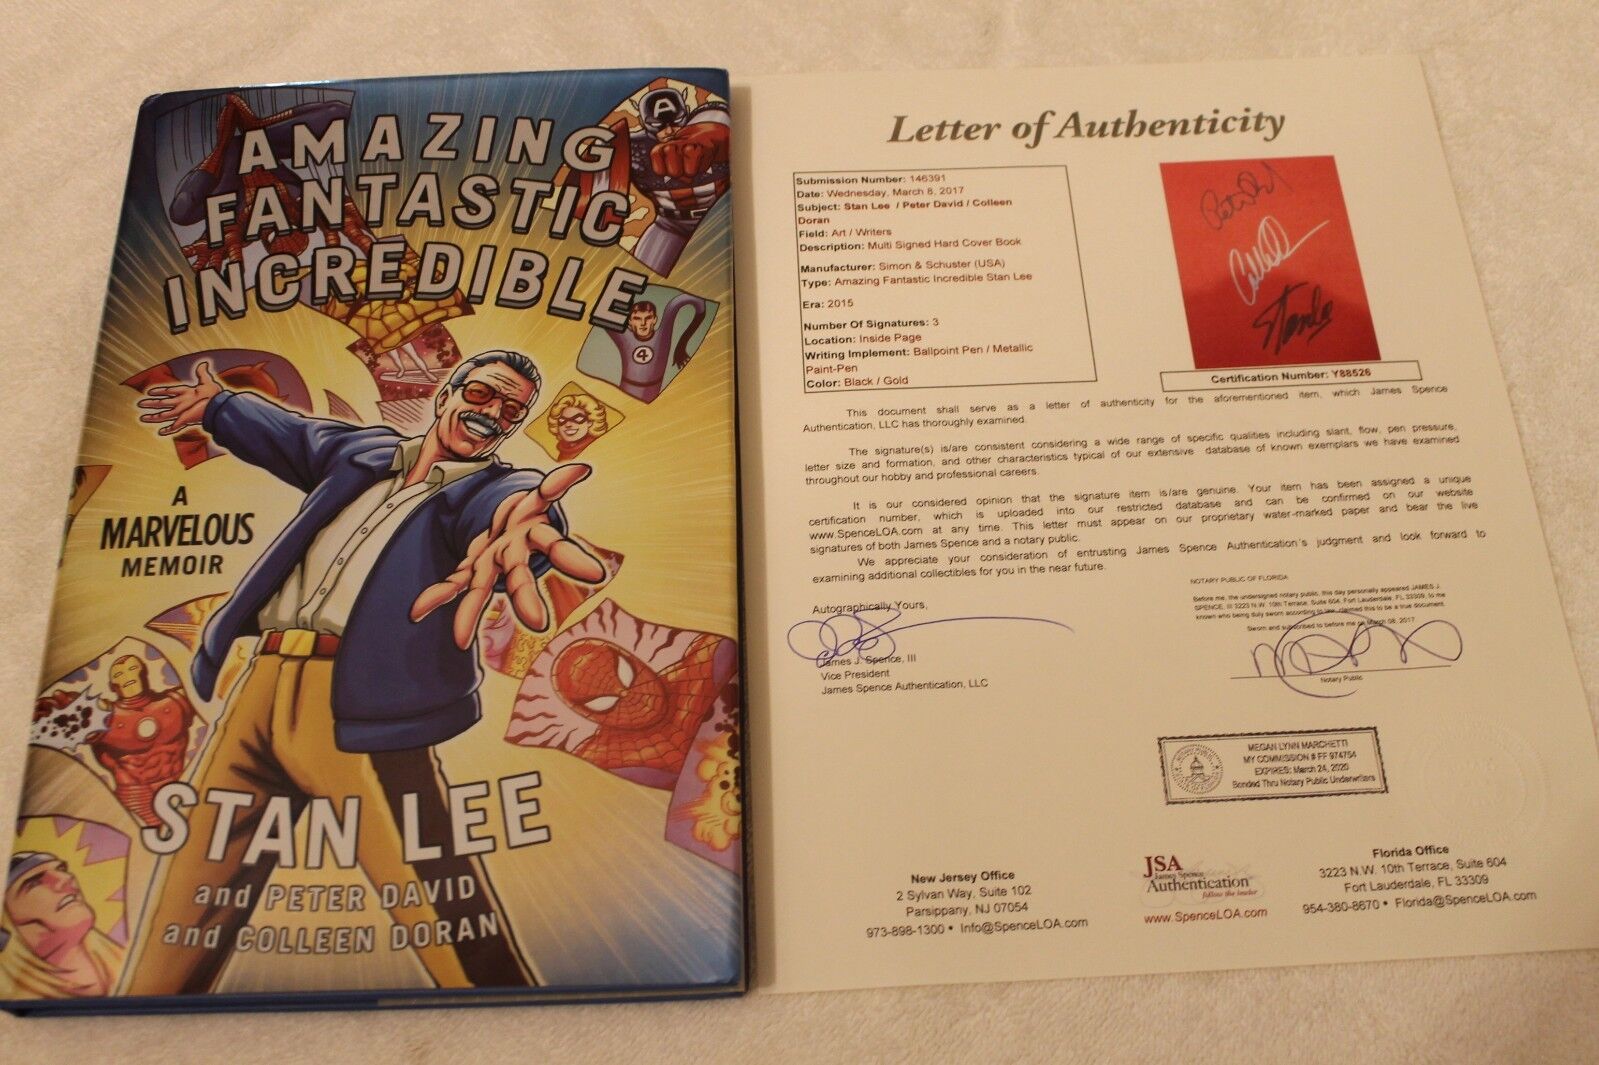 Stan Lee SIGNED -3x AUTHENTICATED The Amazing Fantastic Incredible Memoir book